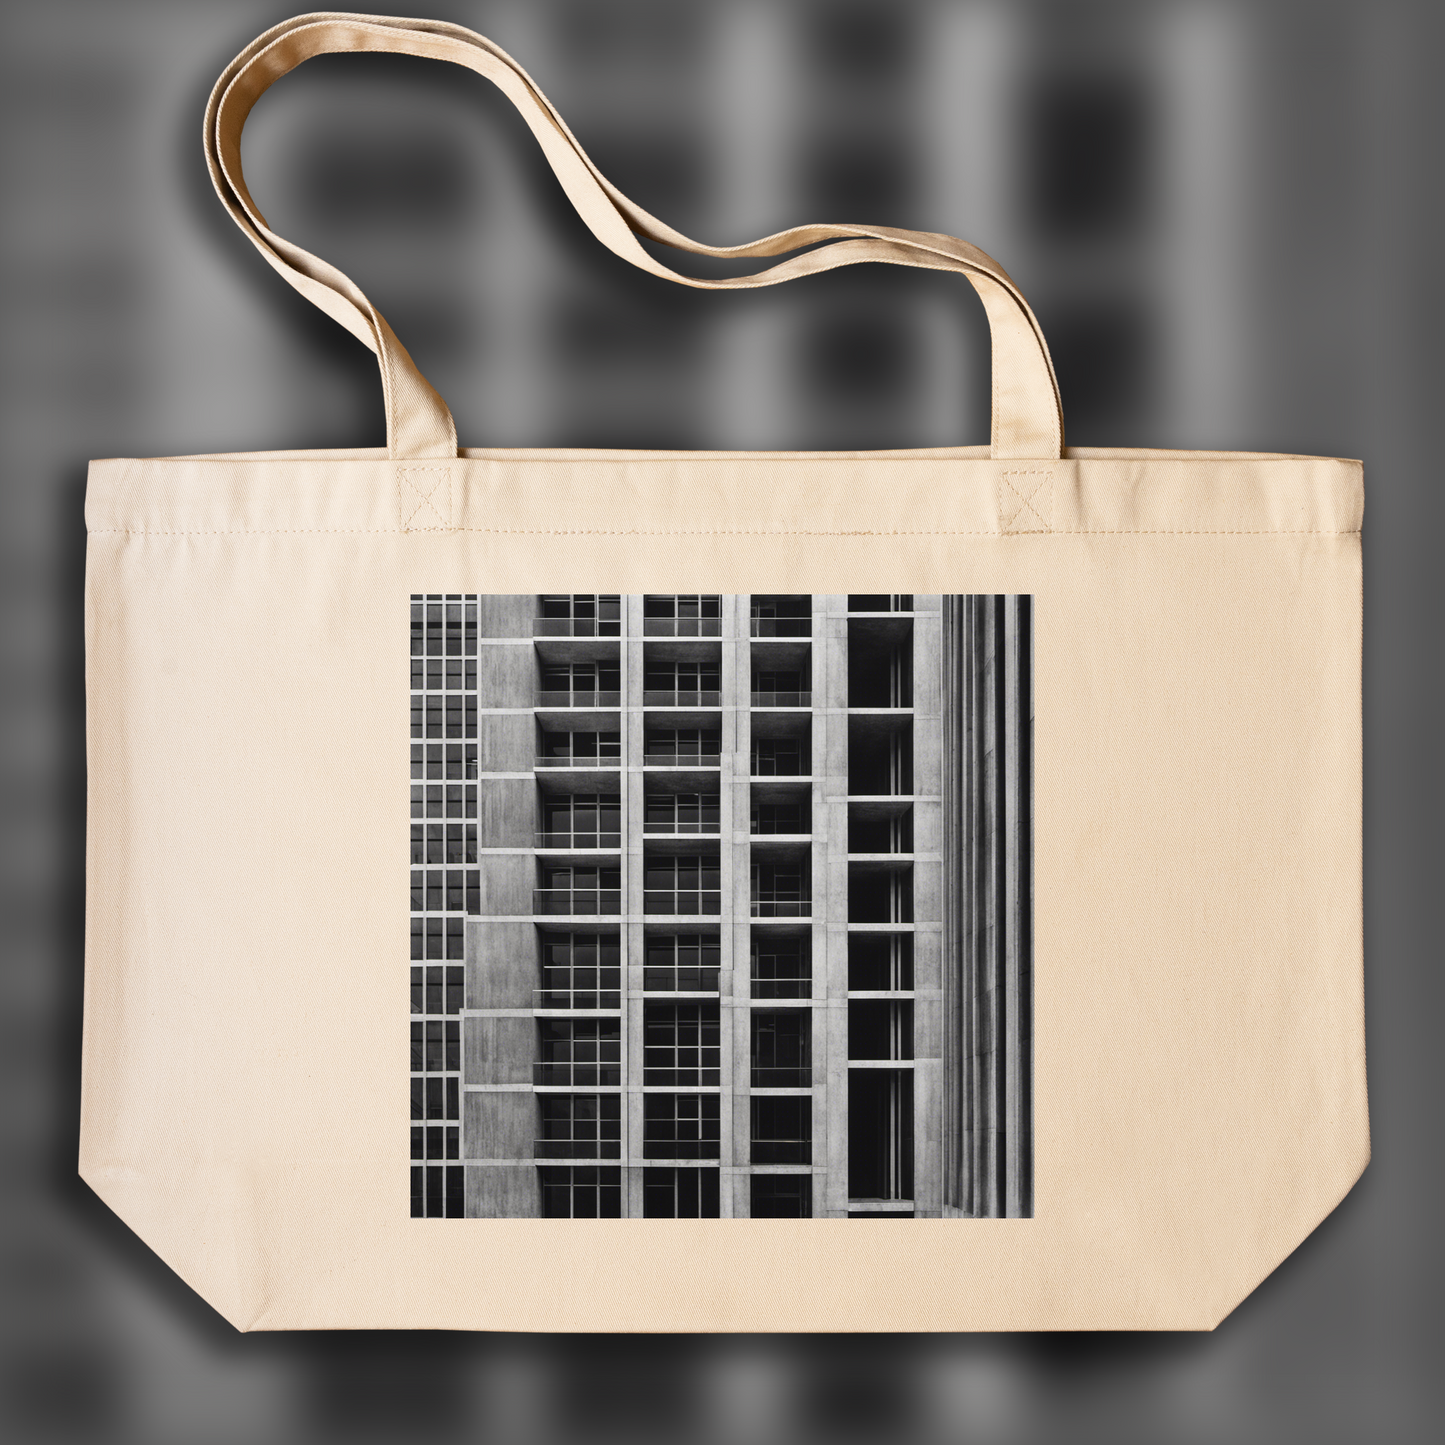 Tote bag large - Urban, black and white abstract explorations, Brutalist architecture, city - 3546003890